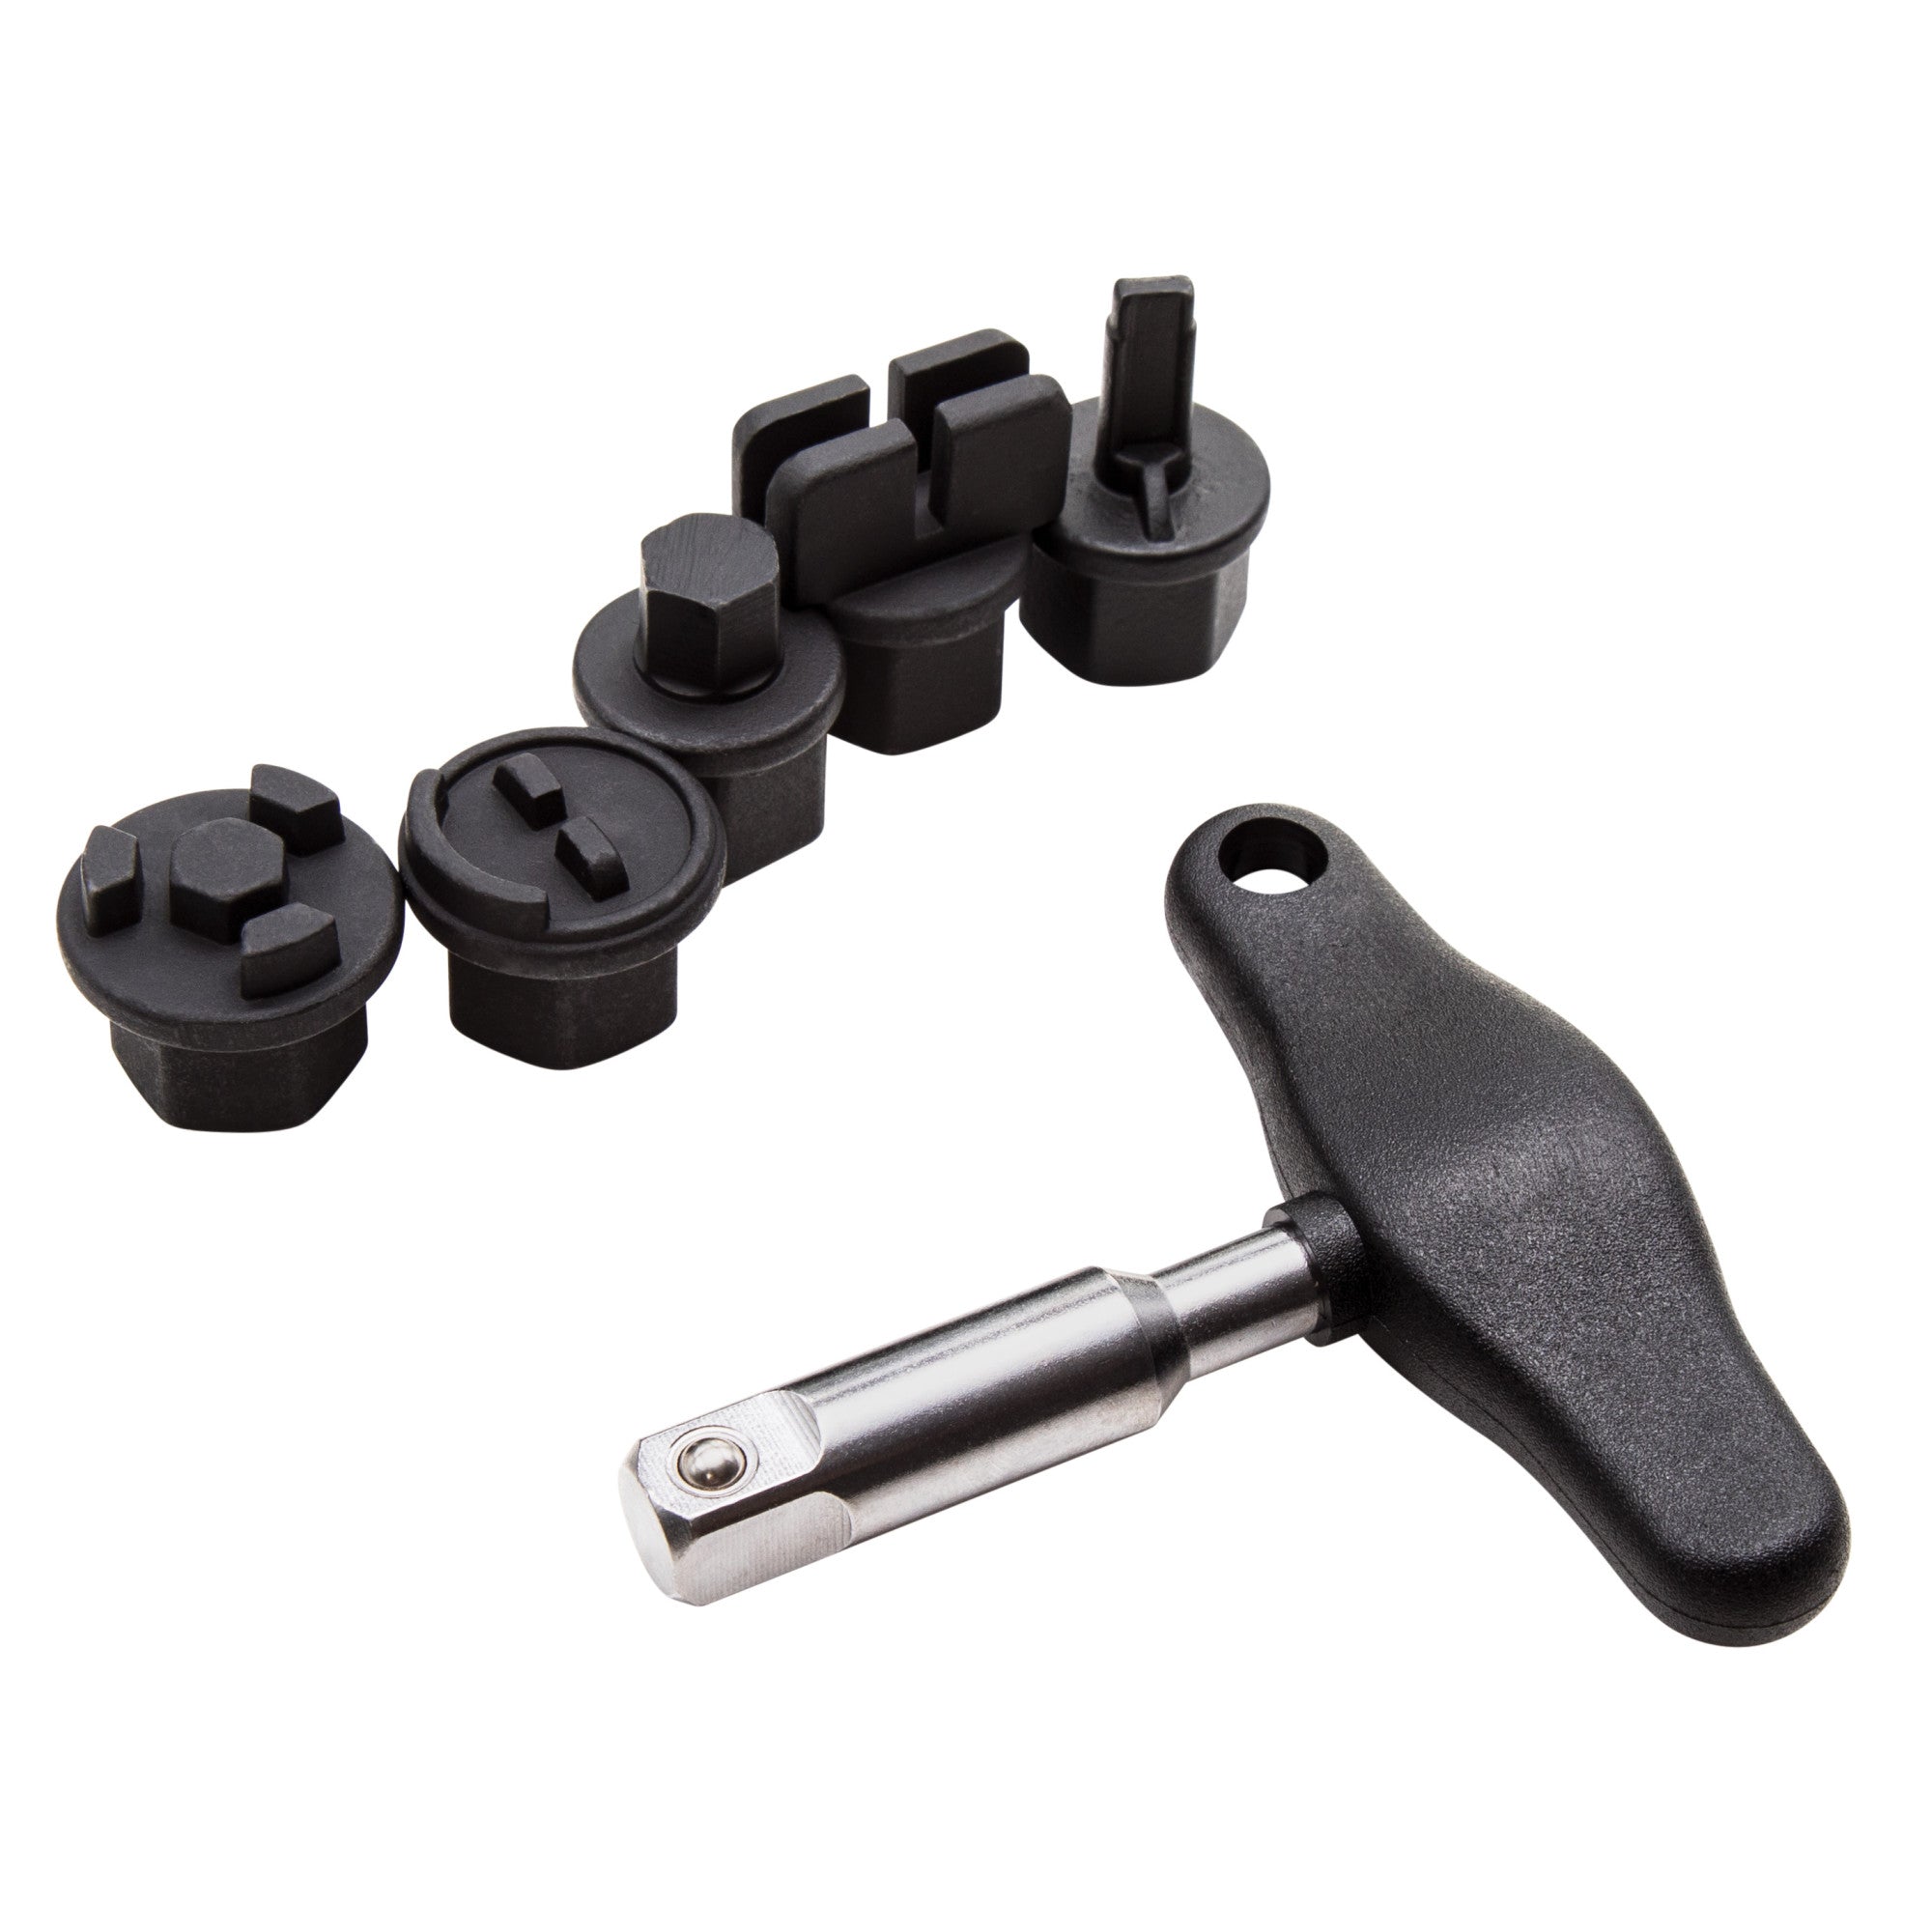 Steelman 42439 6-Piece Oil Drain Plug Wrench Kit for Installing and Removing Plastic Oil Drain Plugs and Bolts